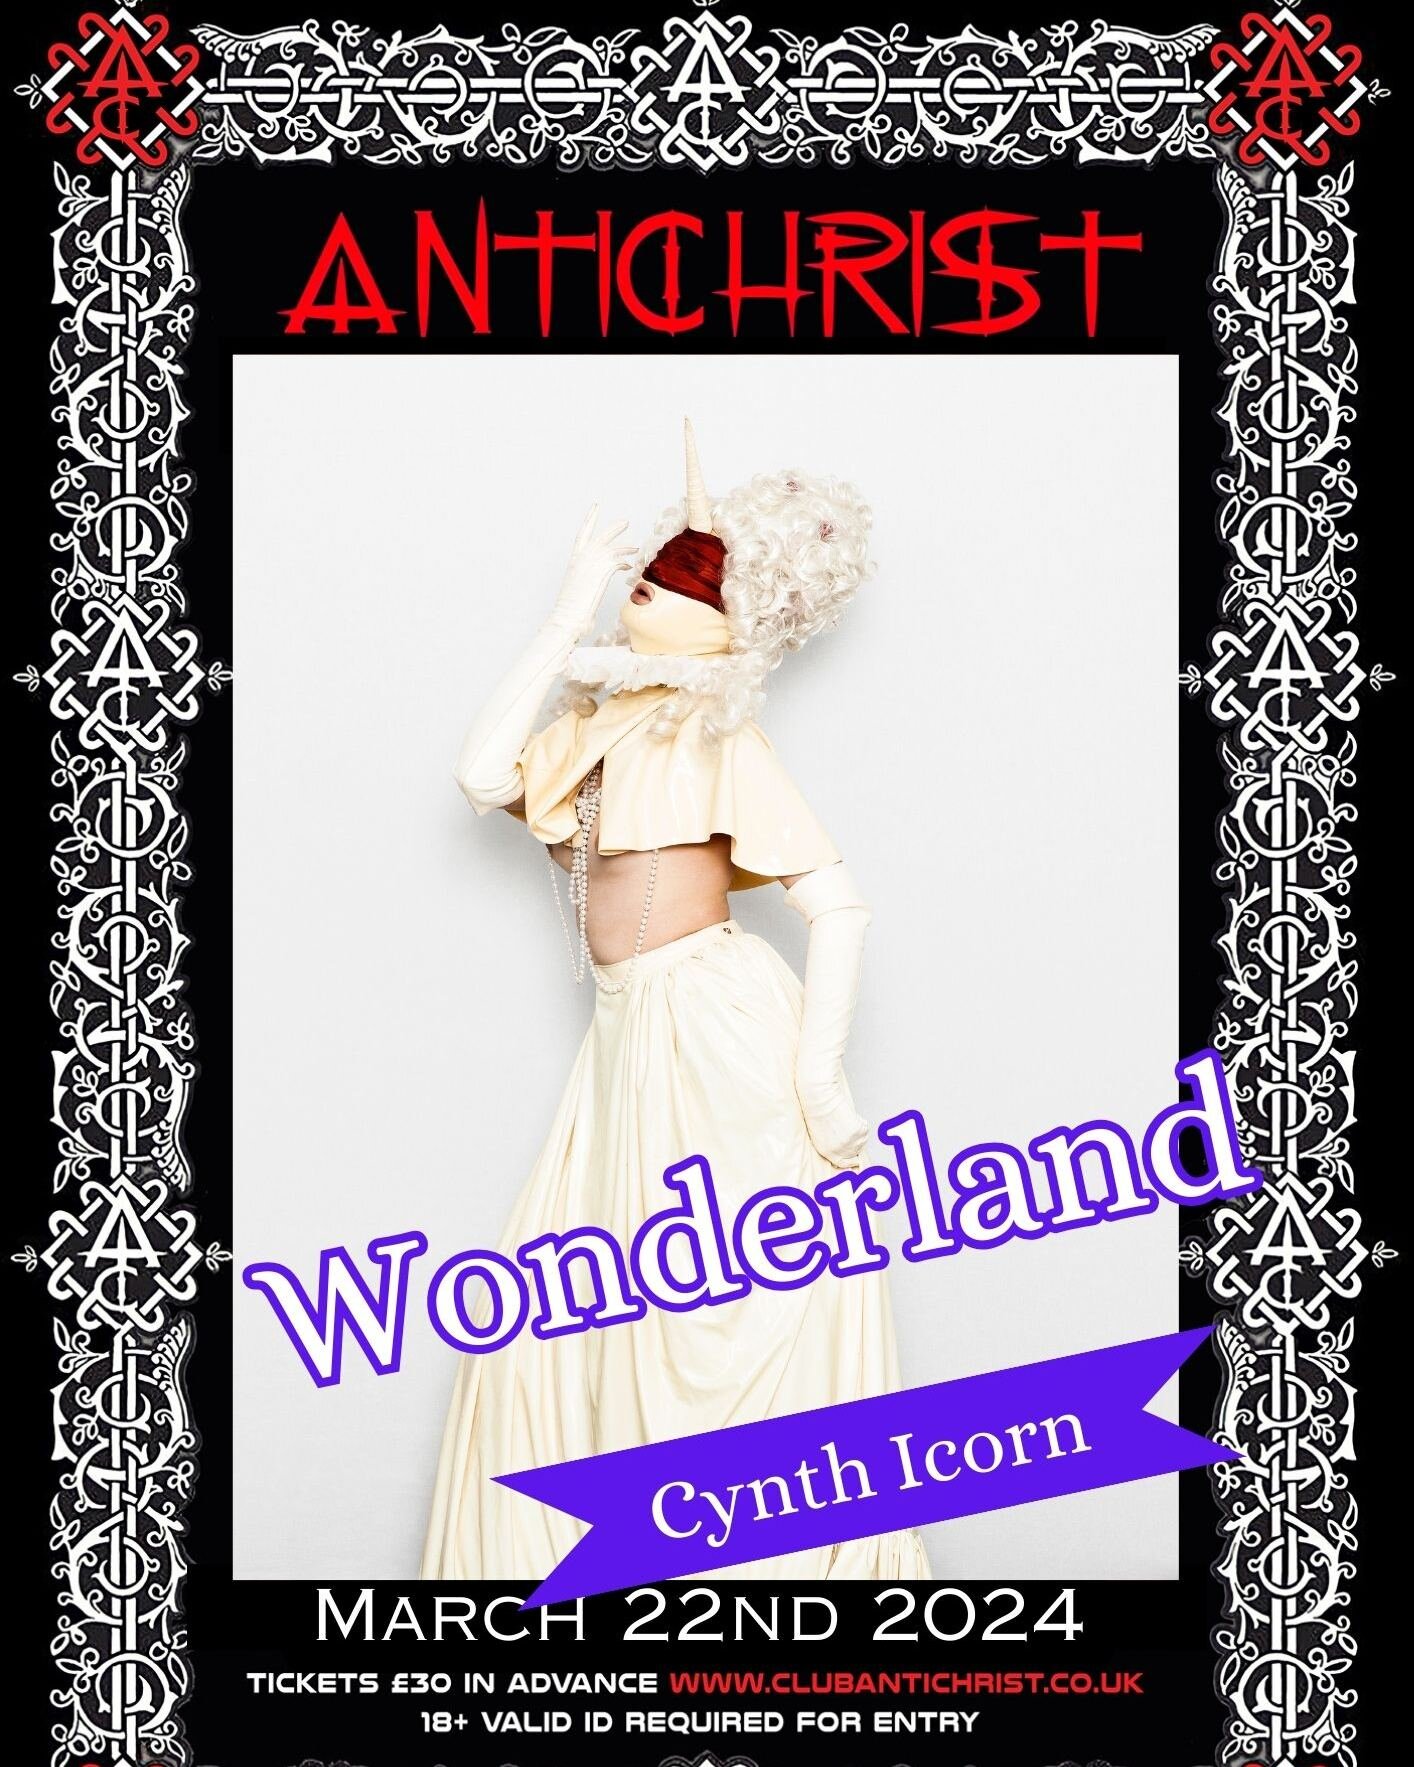 ONE WEEK till AC!!

For our Wonderland Theme, Cynth Icorn says Let Them Eat Cake! She's bringing Marie Antoinette to the stage of the Theatre of Sin...

She joins Marnie Scarlet, Bone Cult, Mama Mamba, VirginX and Satan's Strip Show.

Tickets are sti